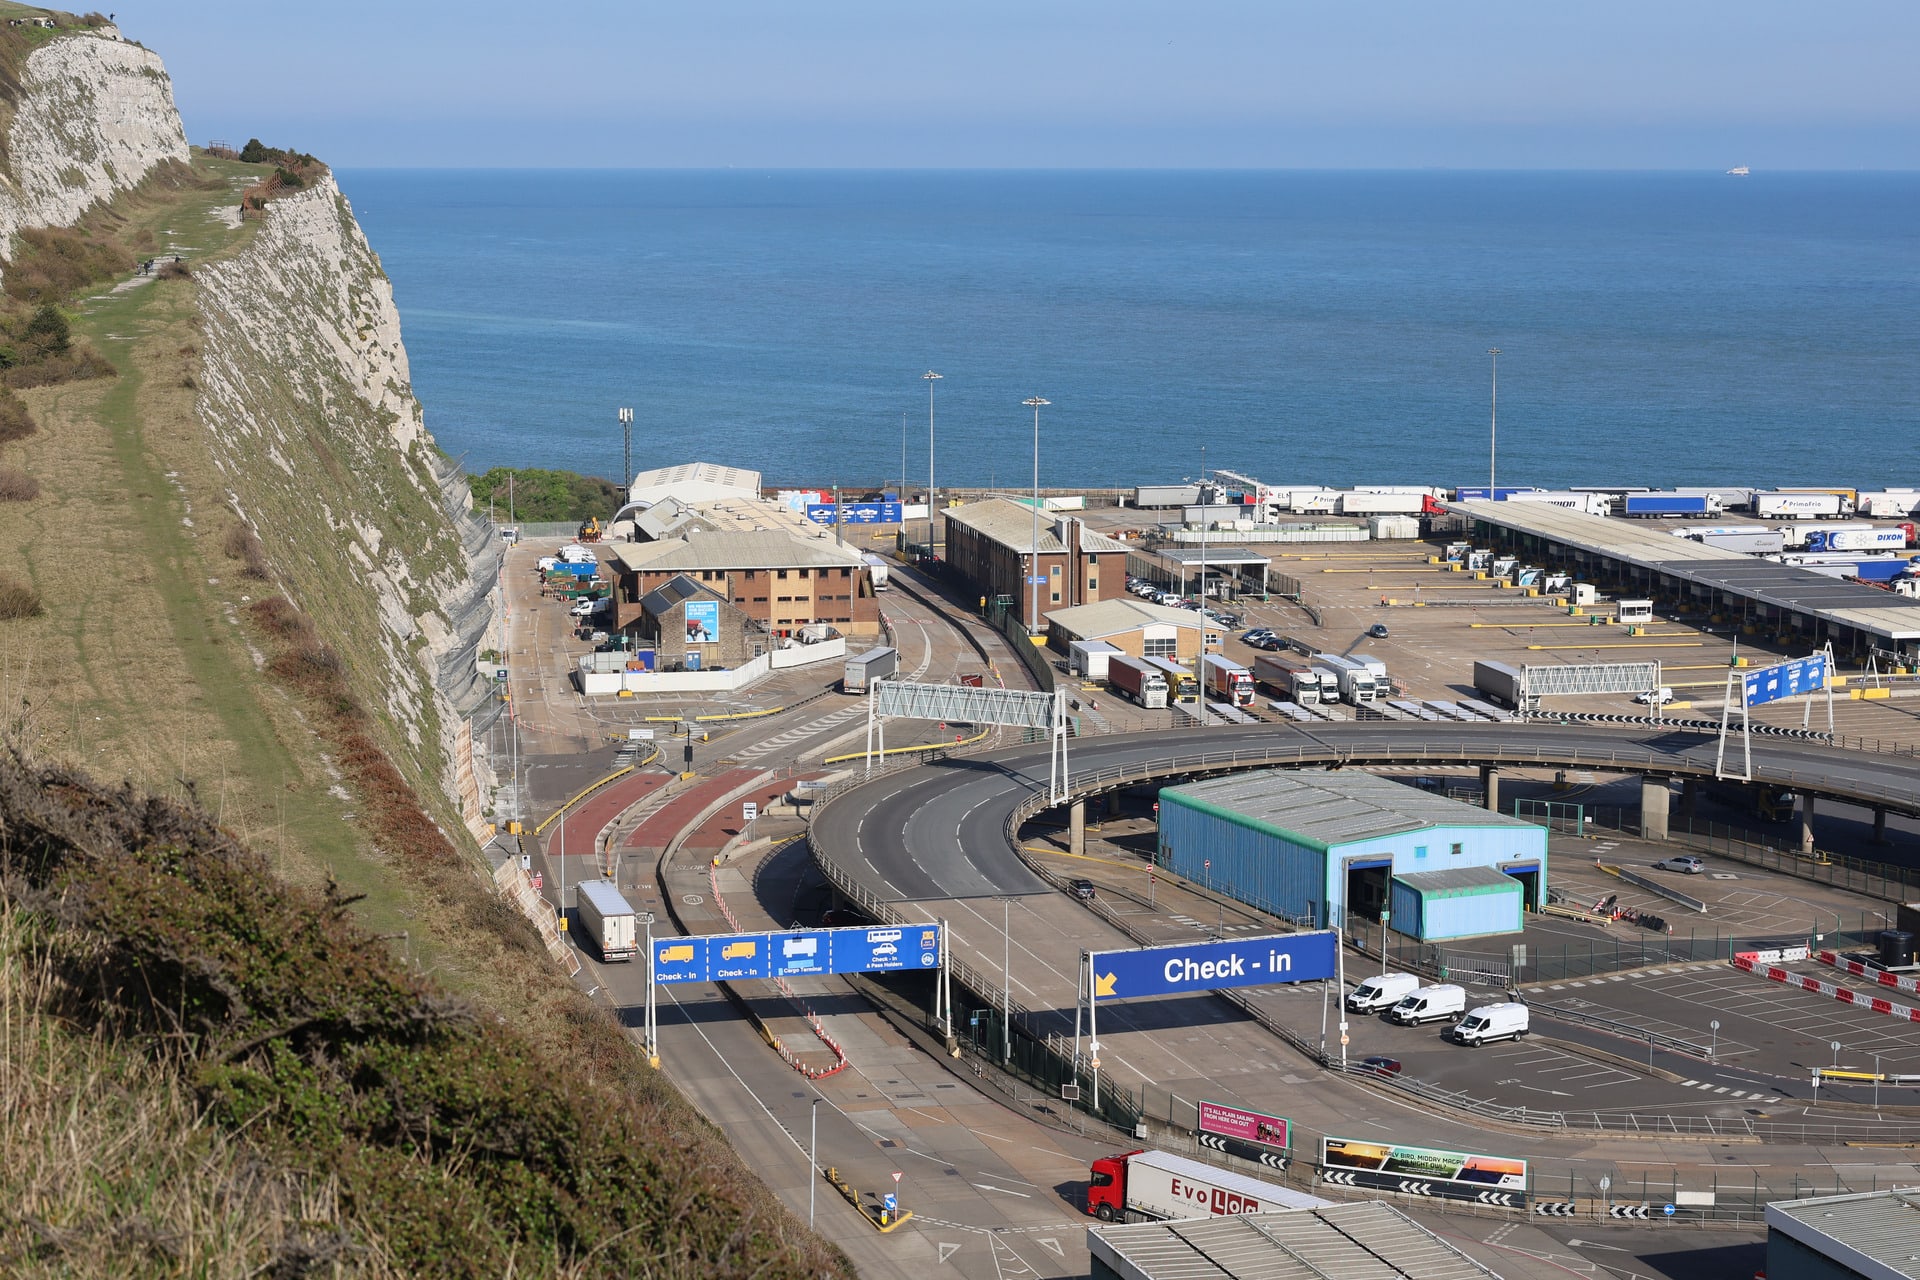 A photograph of Dover Port, captured on fieldwork.